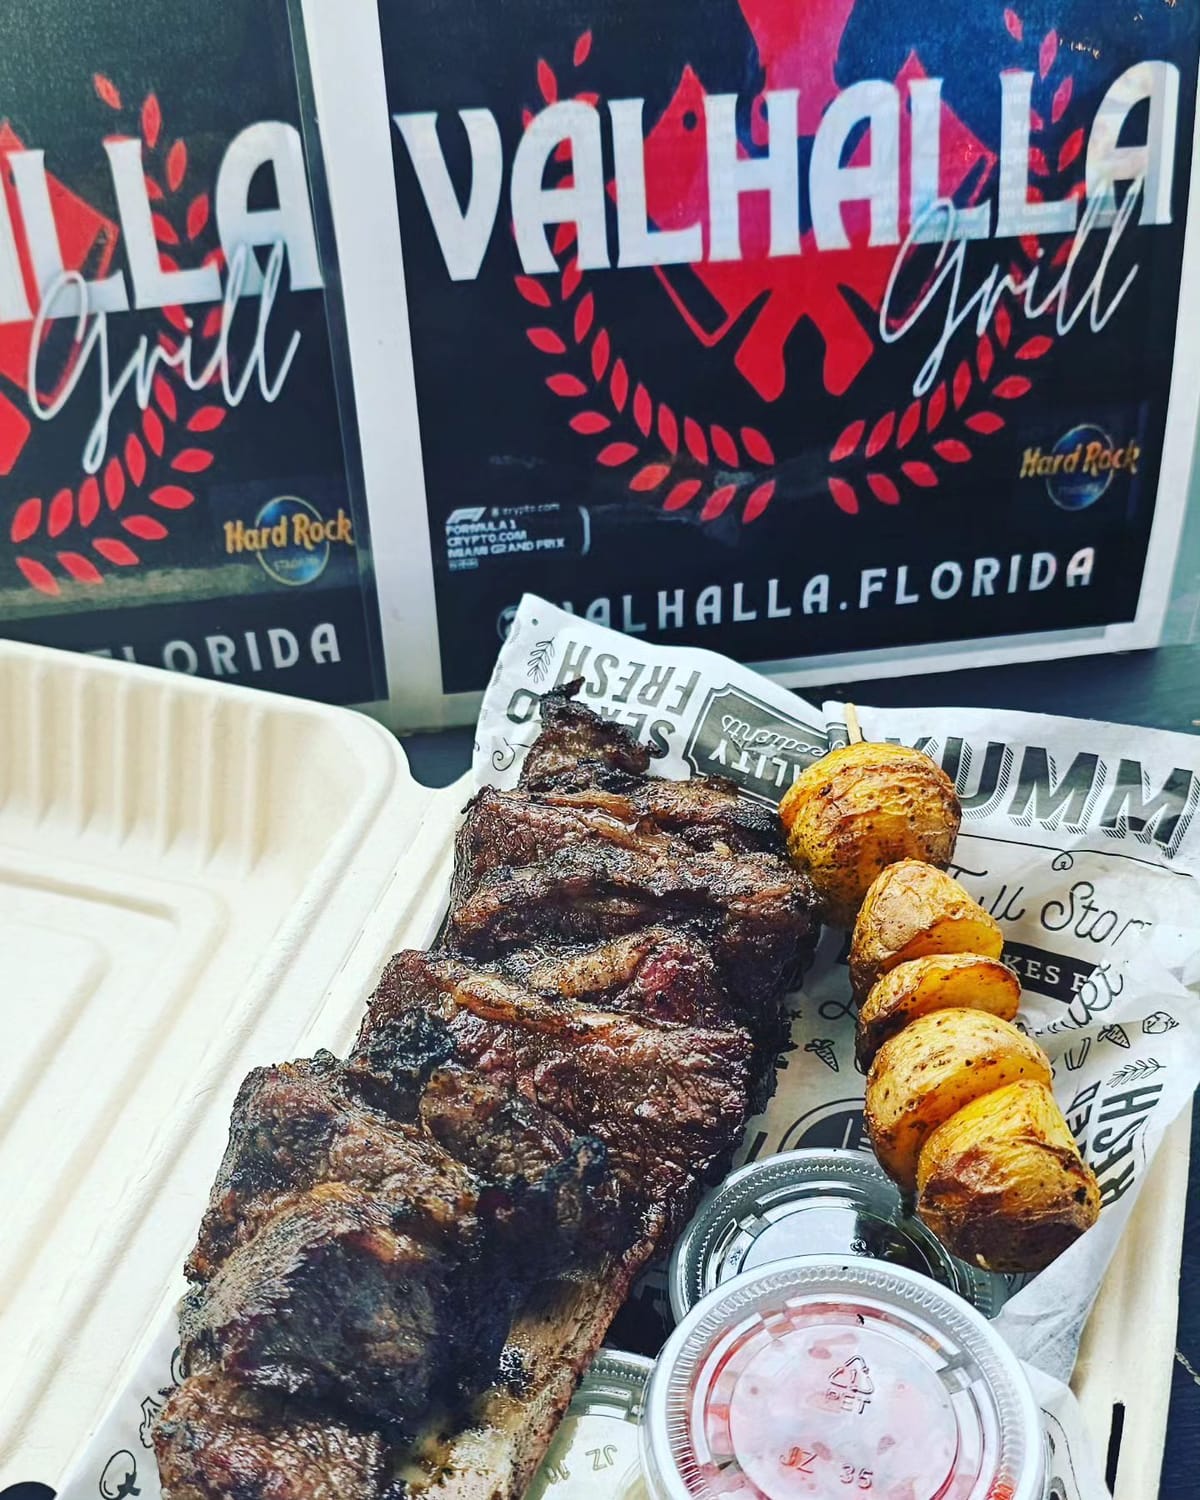 Valhalla Grill Opening in the Soon-to-be Renovated Harrison Hotel